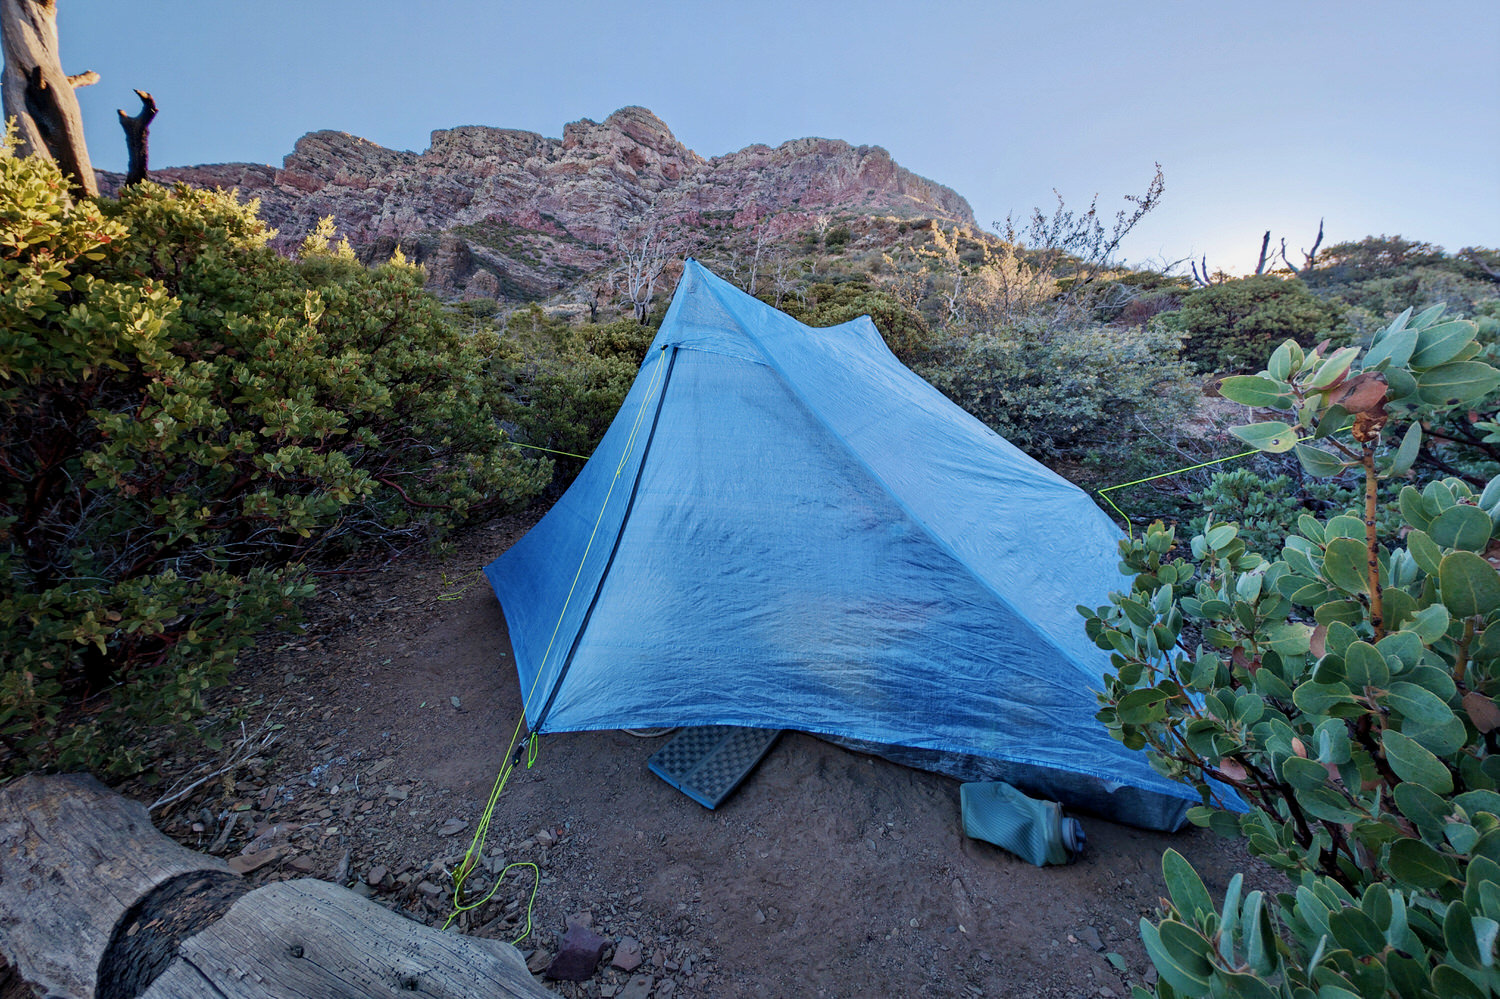 The Zpacks Duplex Zip tent in the early morning light with mountains rising over the tent in the background